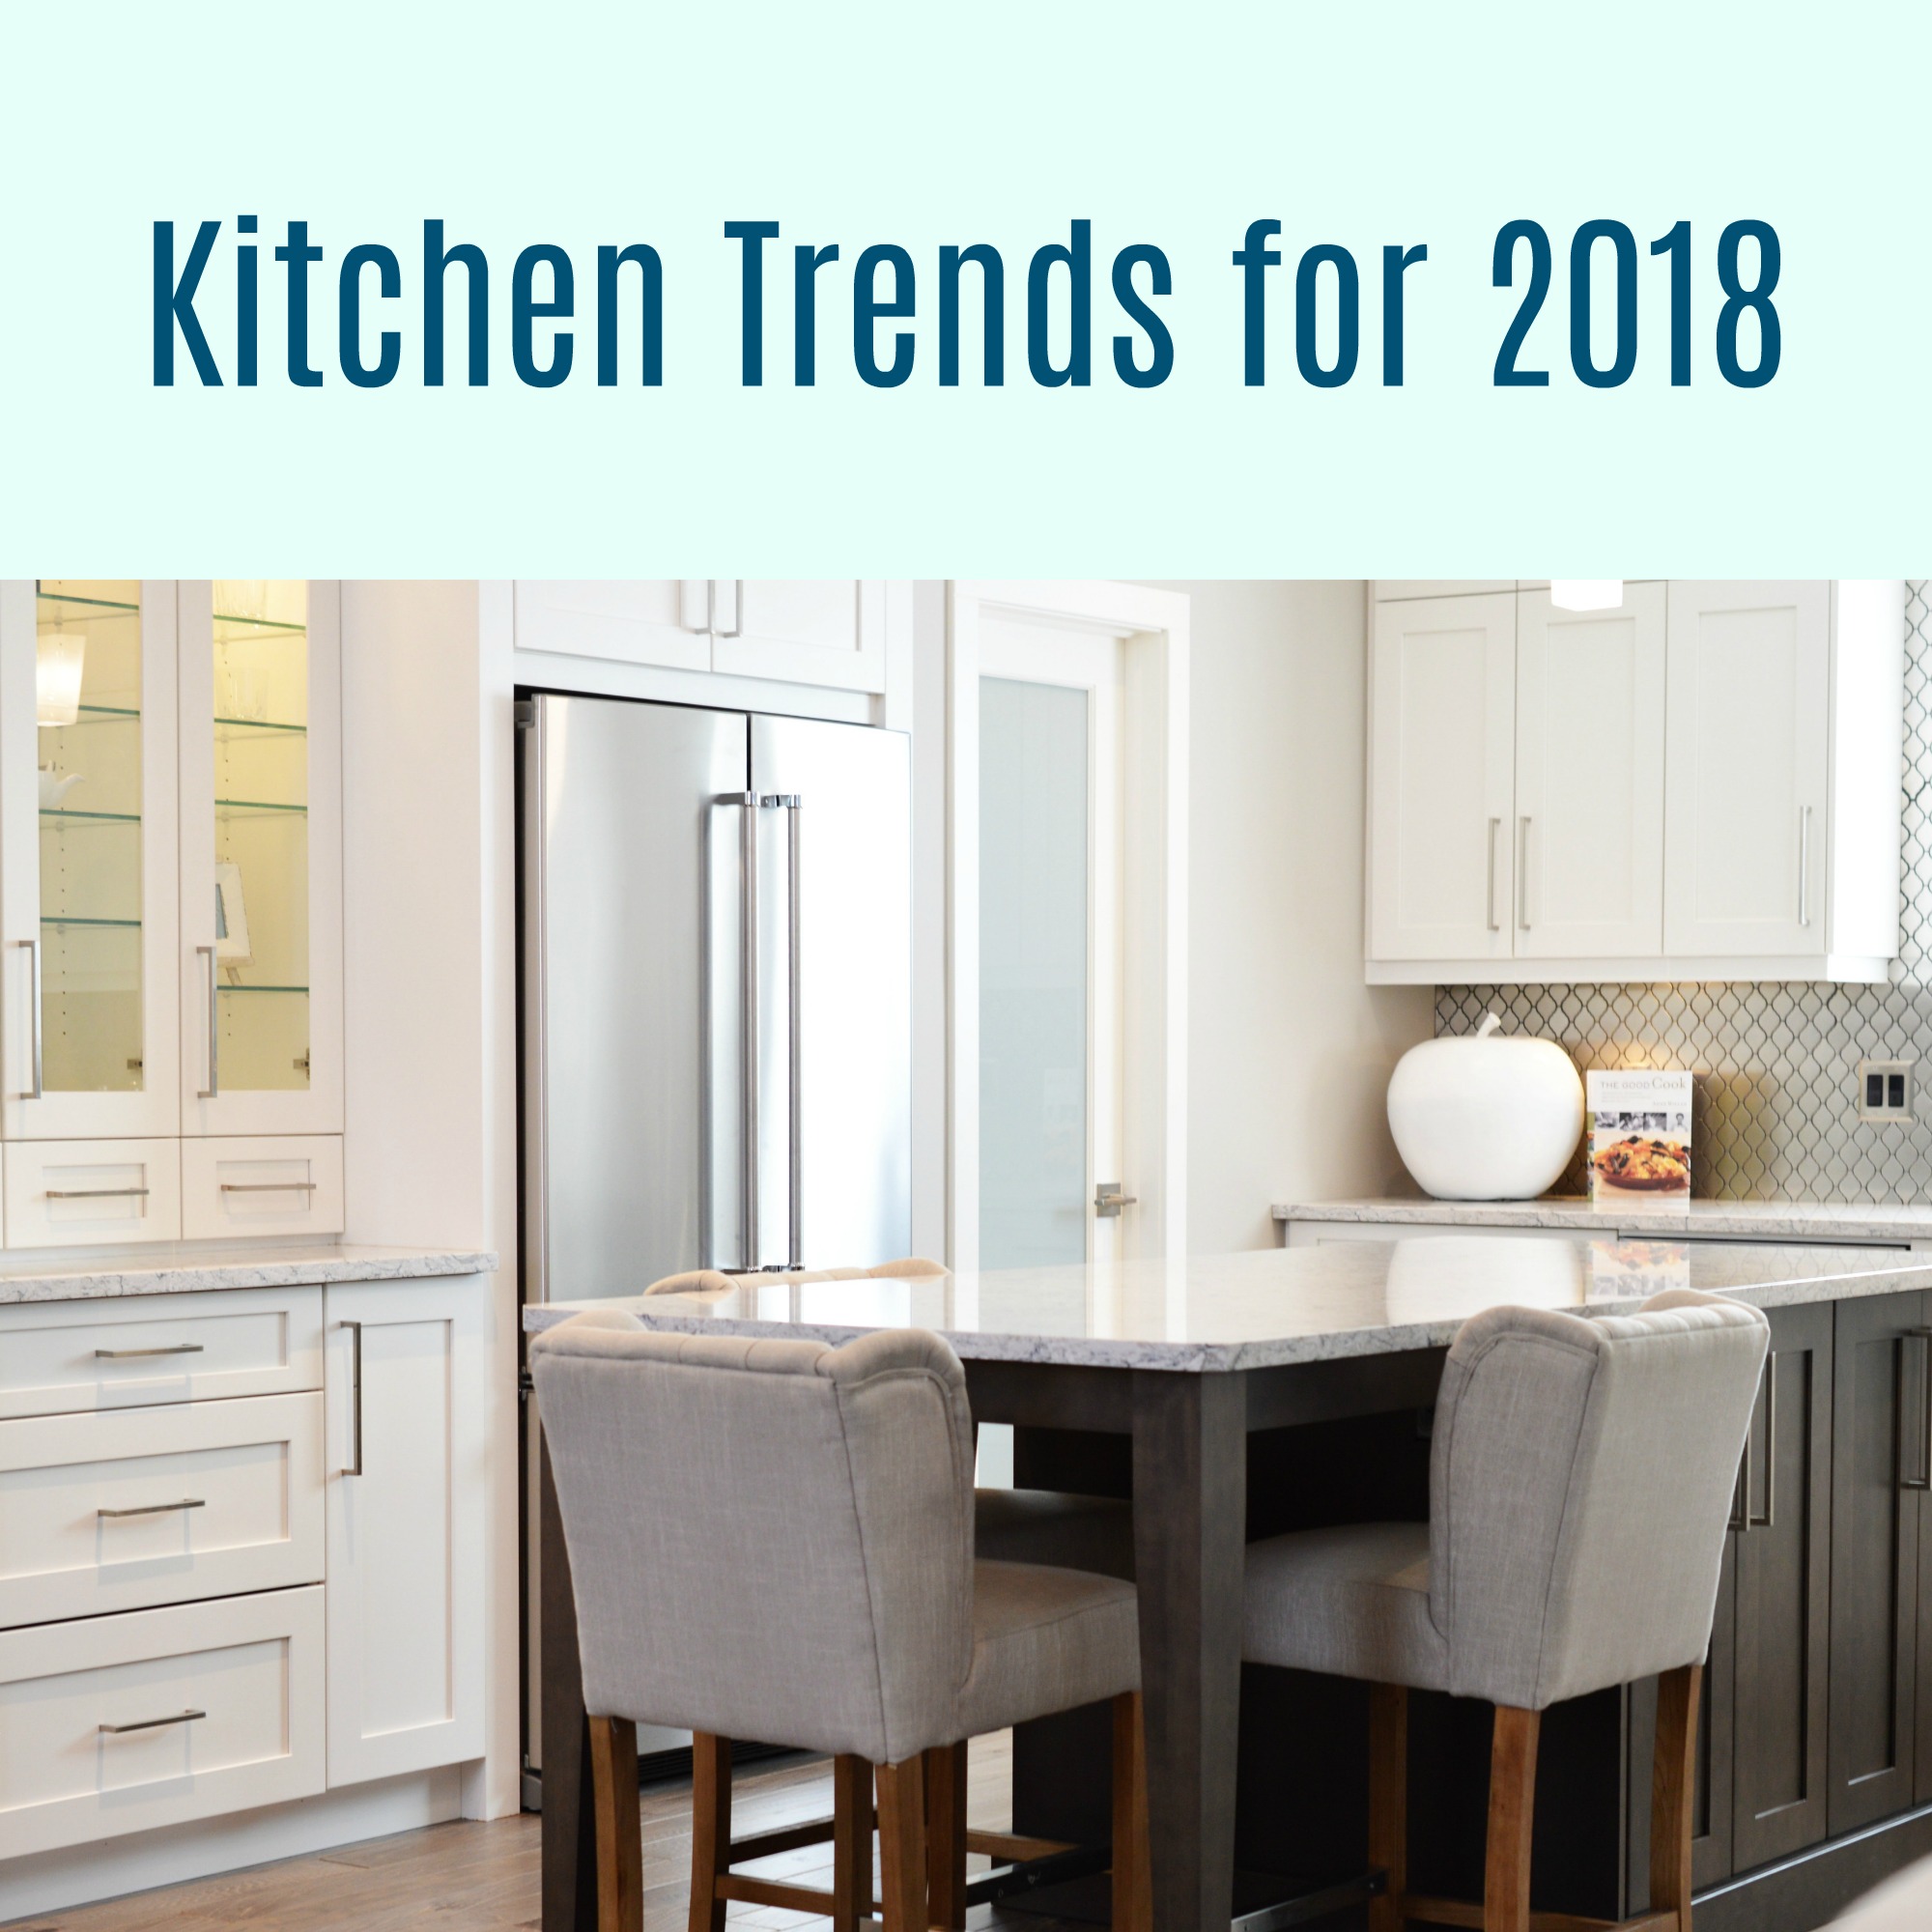 Kitchen Trends for 2018